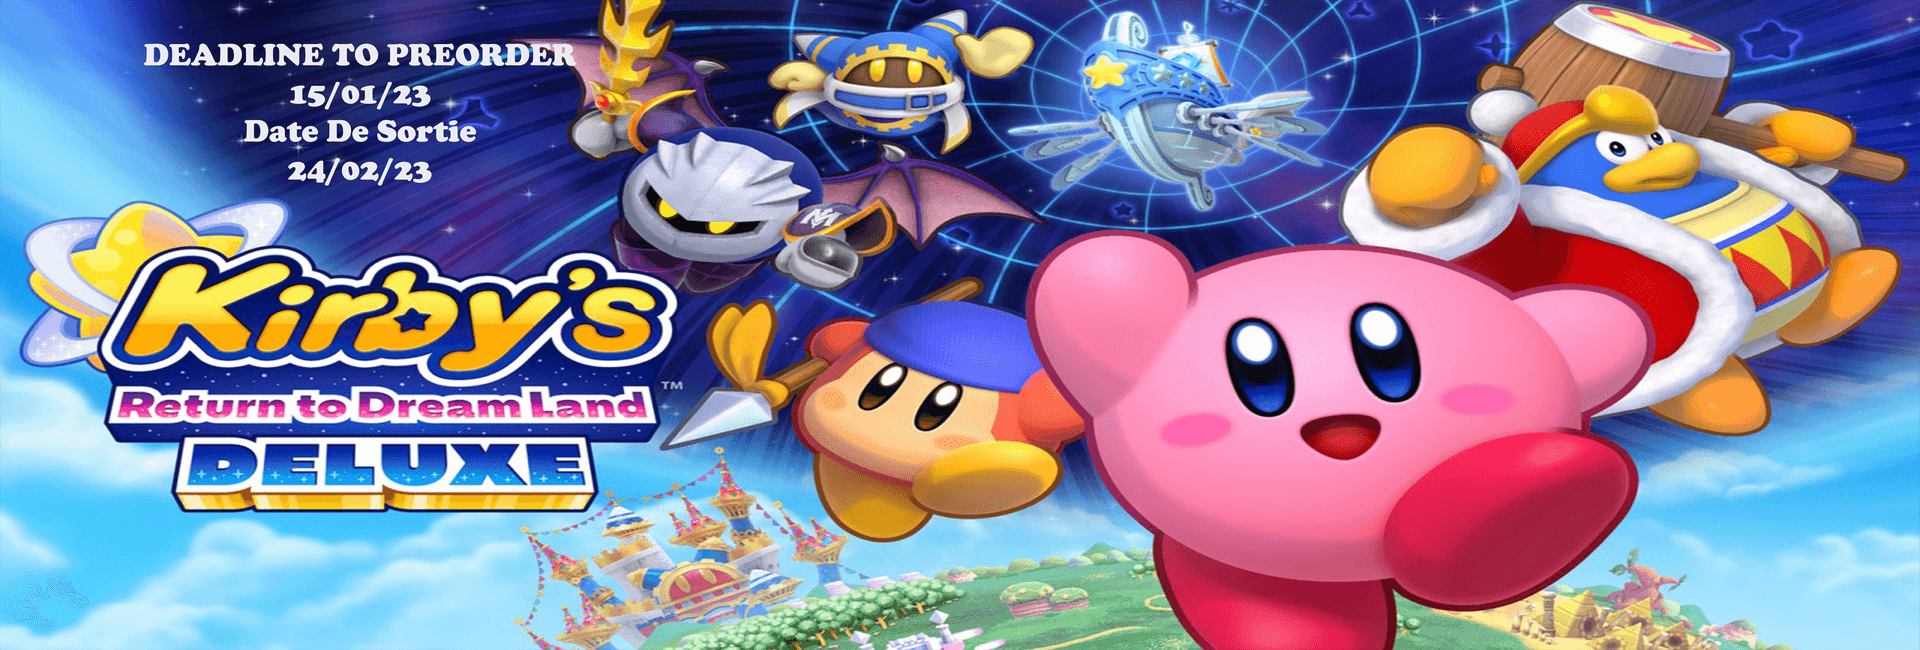 kirby-preorder-1-